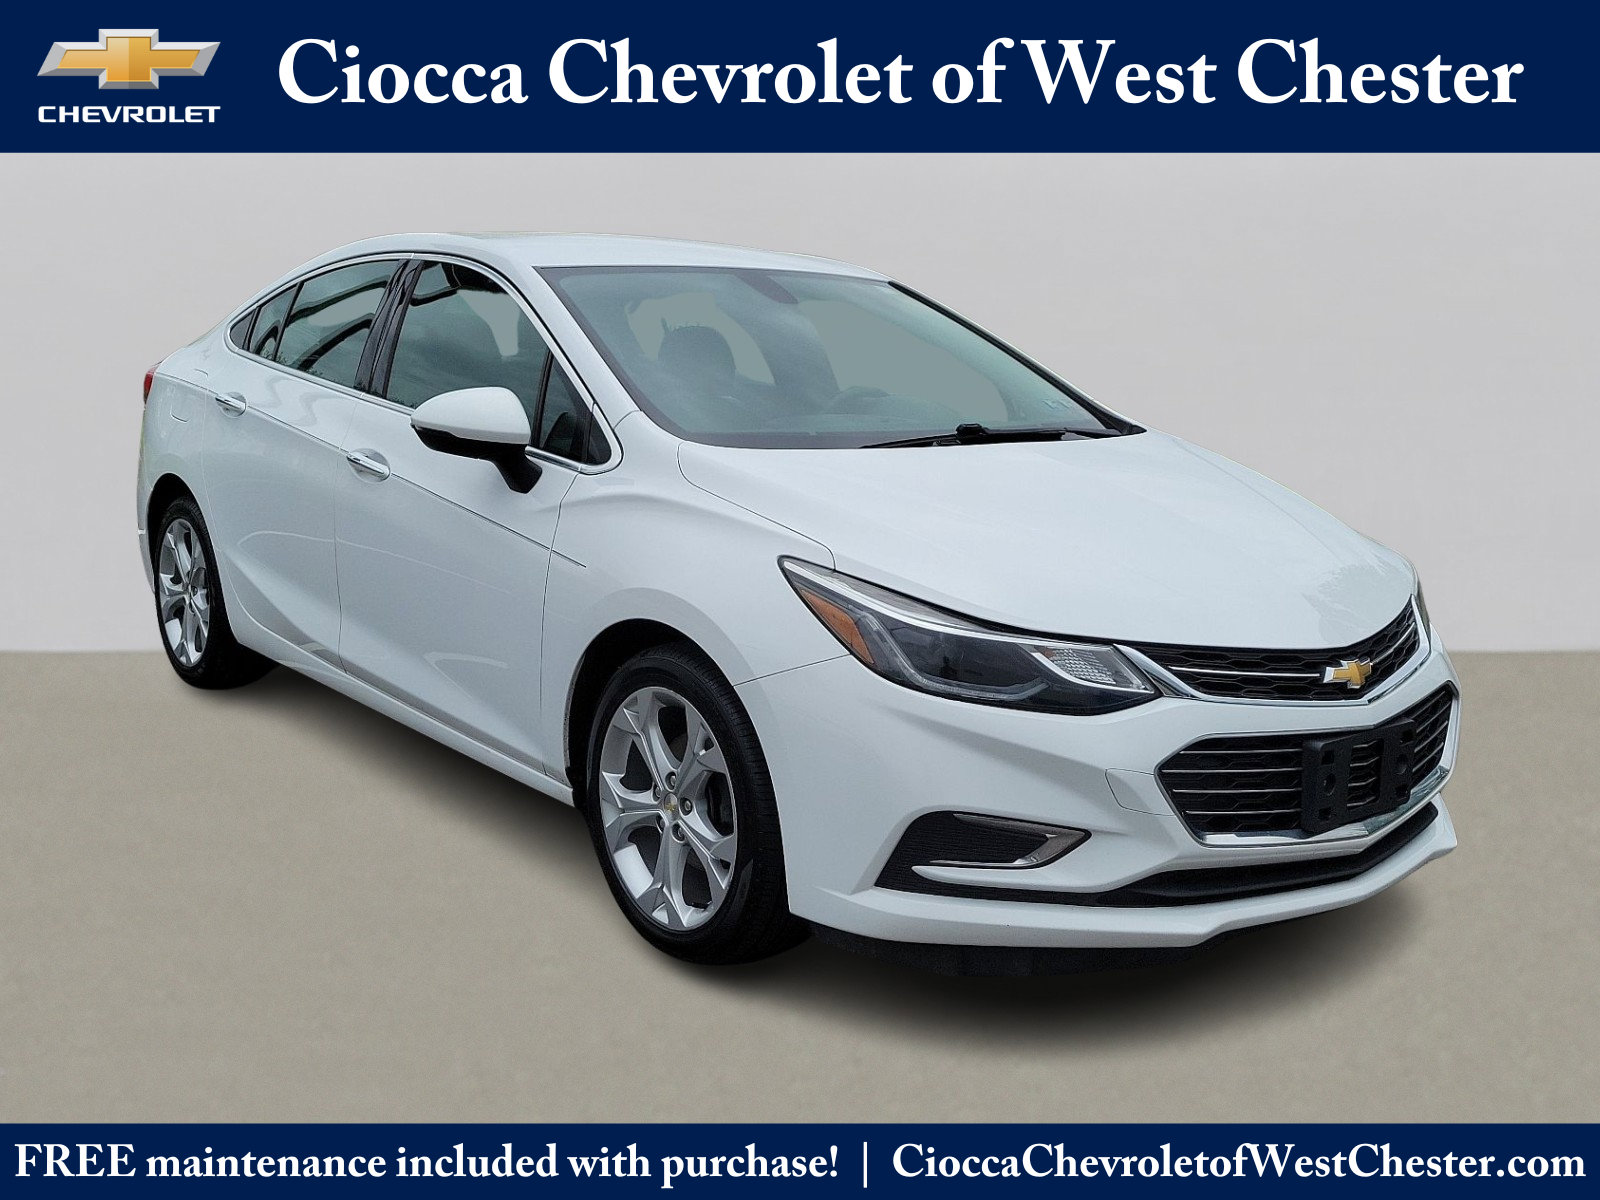 2018 Chevrolet Cruze West Chester PA